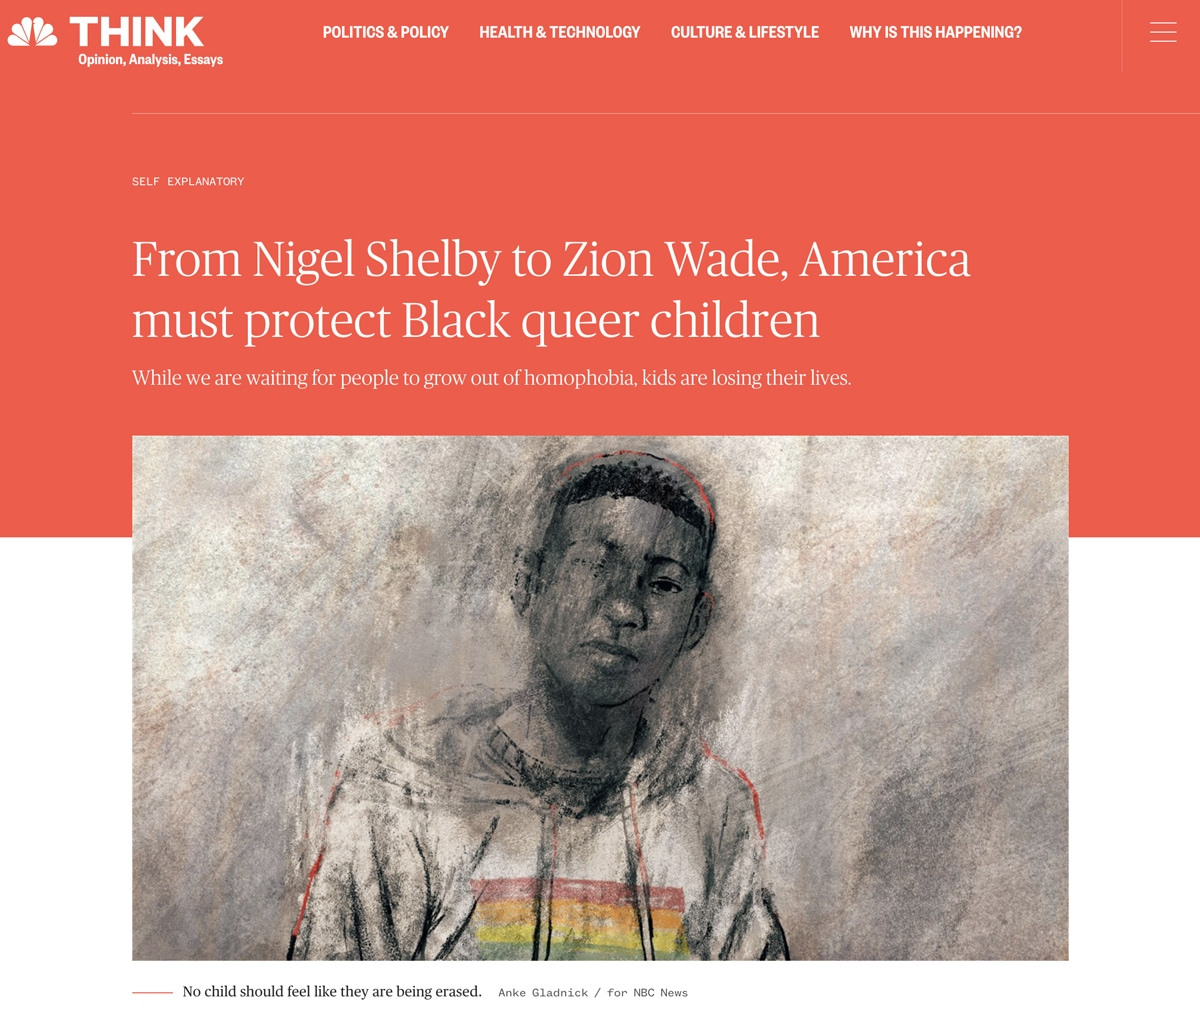 Web page screenshot of NBC article page, illustration by Anke Gladnick